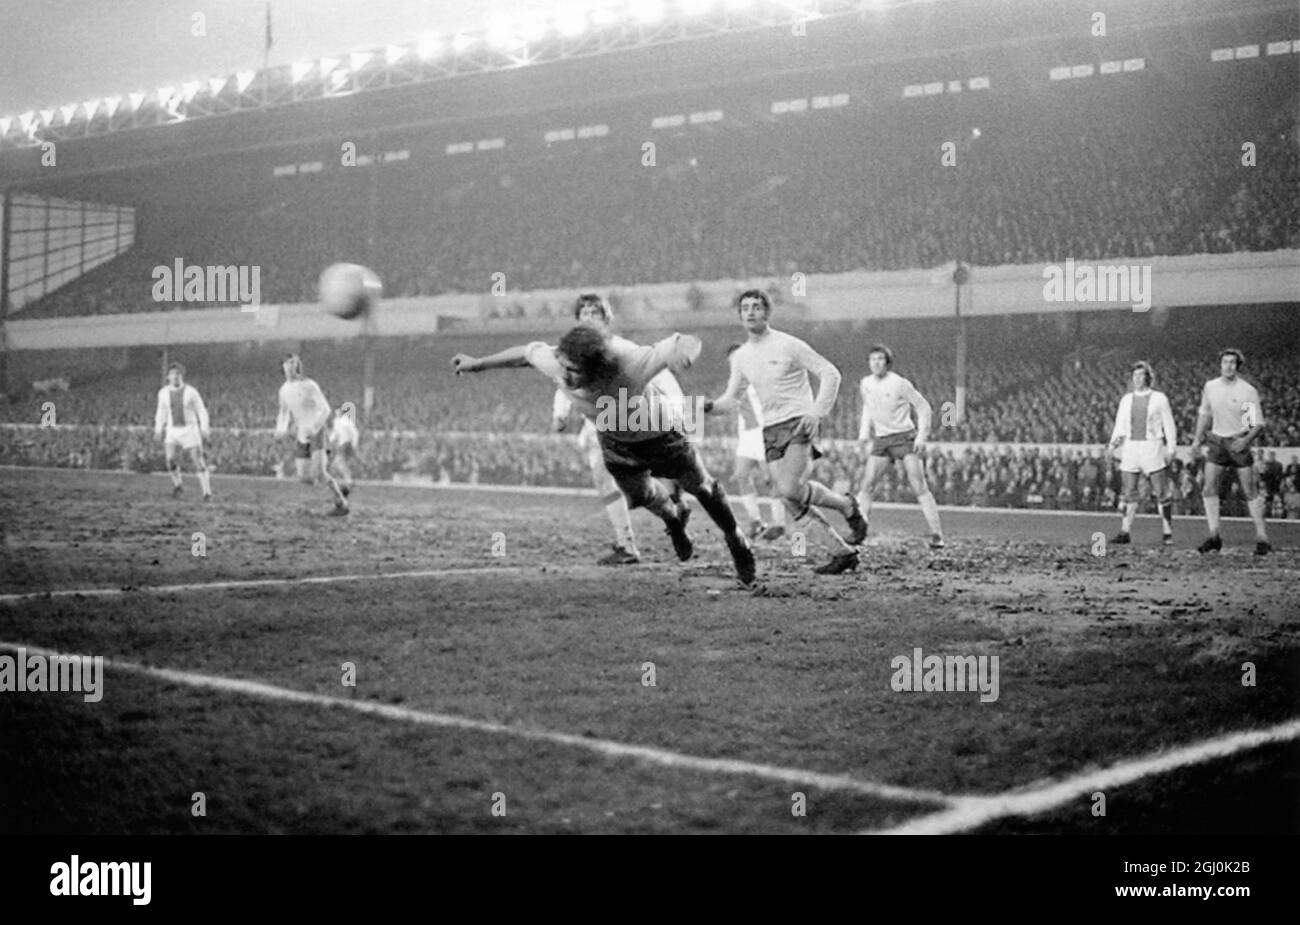 European Fairs Cup Semi-Final 1st Leg. Arsenal V Ajax Eddie Kelly of Arsenal (centre) heads the ball away during an Ajax attack in the European Fairs Cup Semi-Final at Highbury. On the extreme left is Charlie George and on the right is Frank McLintock: and extreme right (background) is Jon Sammels. 8th April 1970 Stock Photo